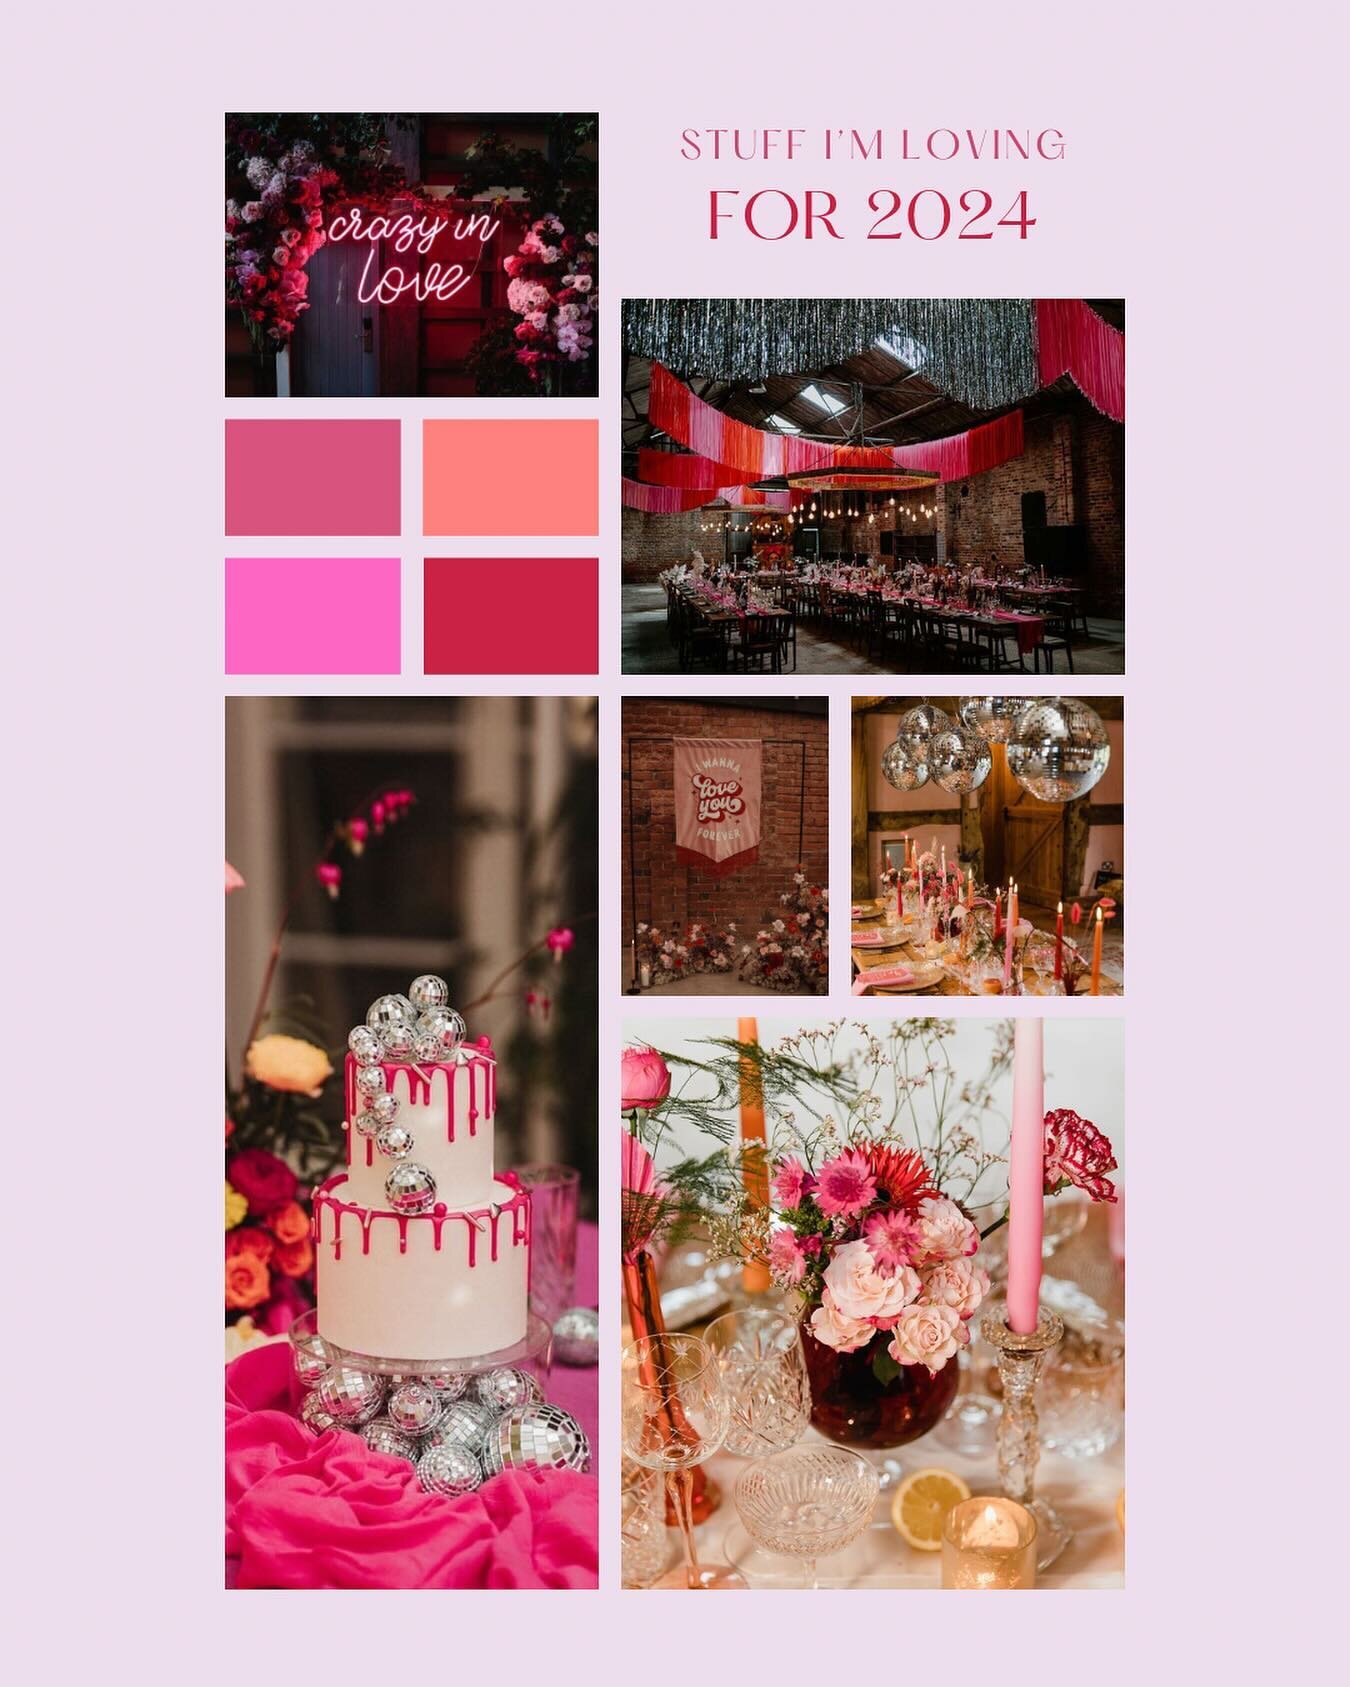 I am so looking forward to celebrating with all my 2024 couples!
.
I&rsquo;ve been getting lots of inspiration from others I follow on here&hellip;and Pinterest of course 🫣
.
Here&rsquo;s some styling I&rsquo;d love to see more of this year:
❤️&zwj;